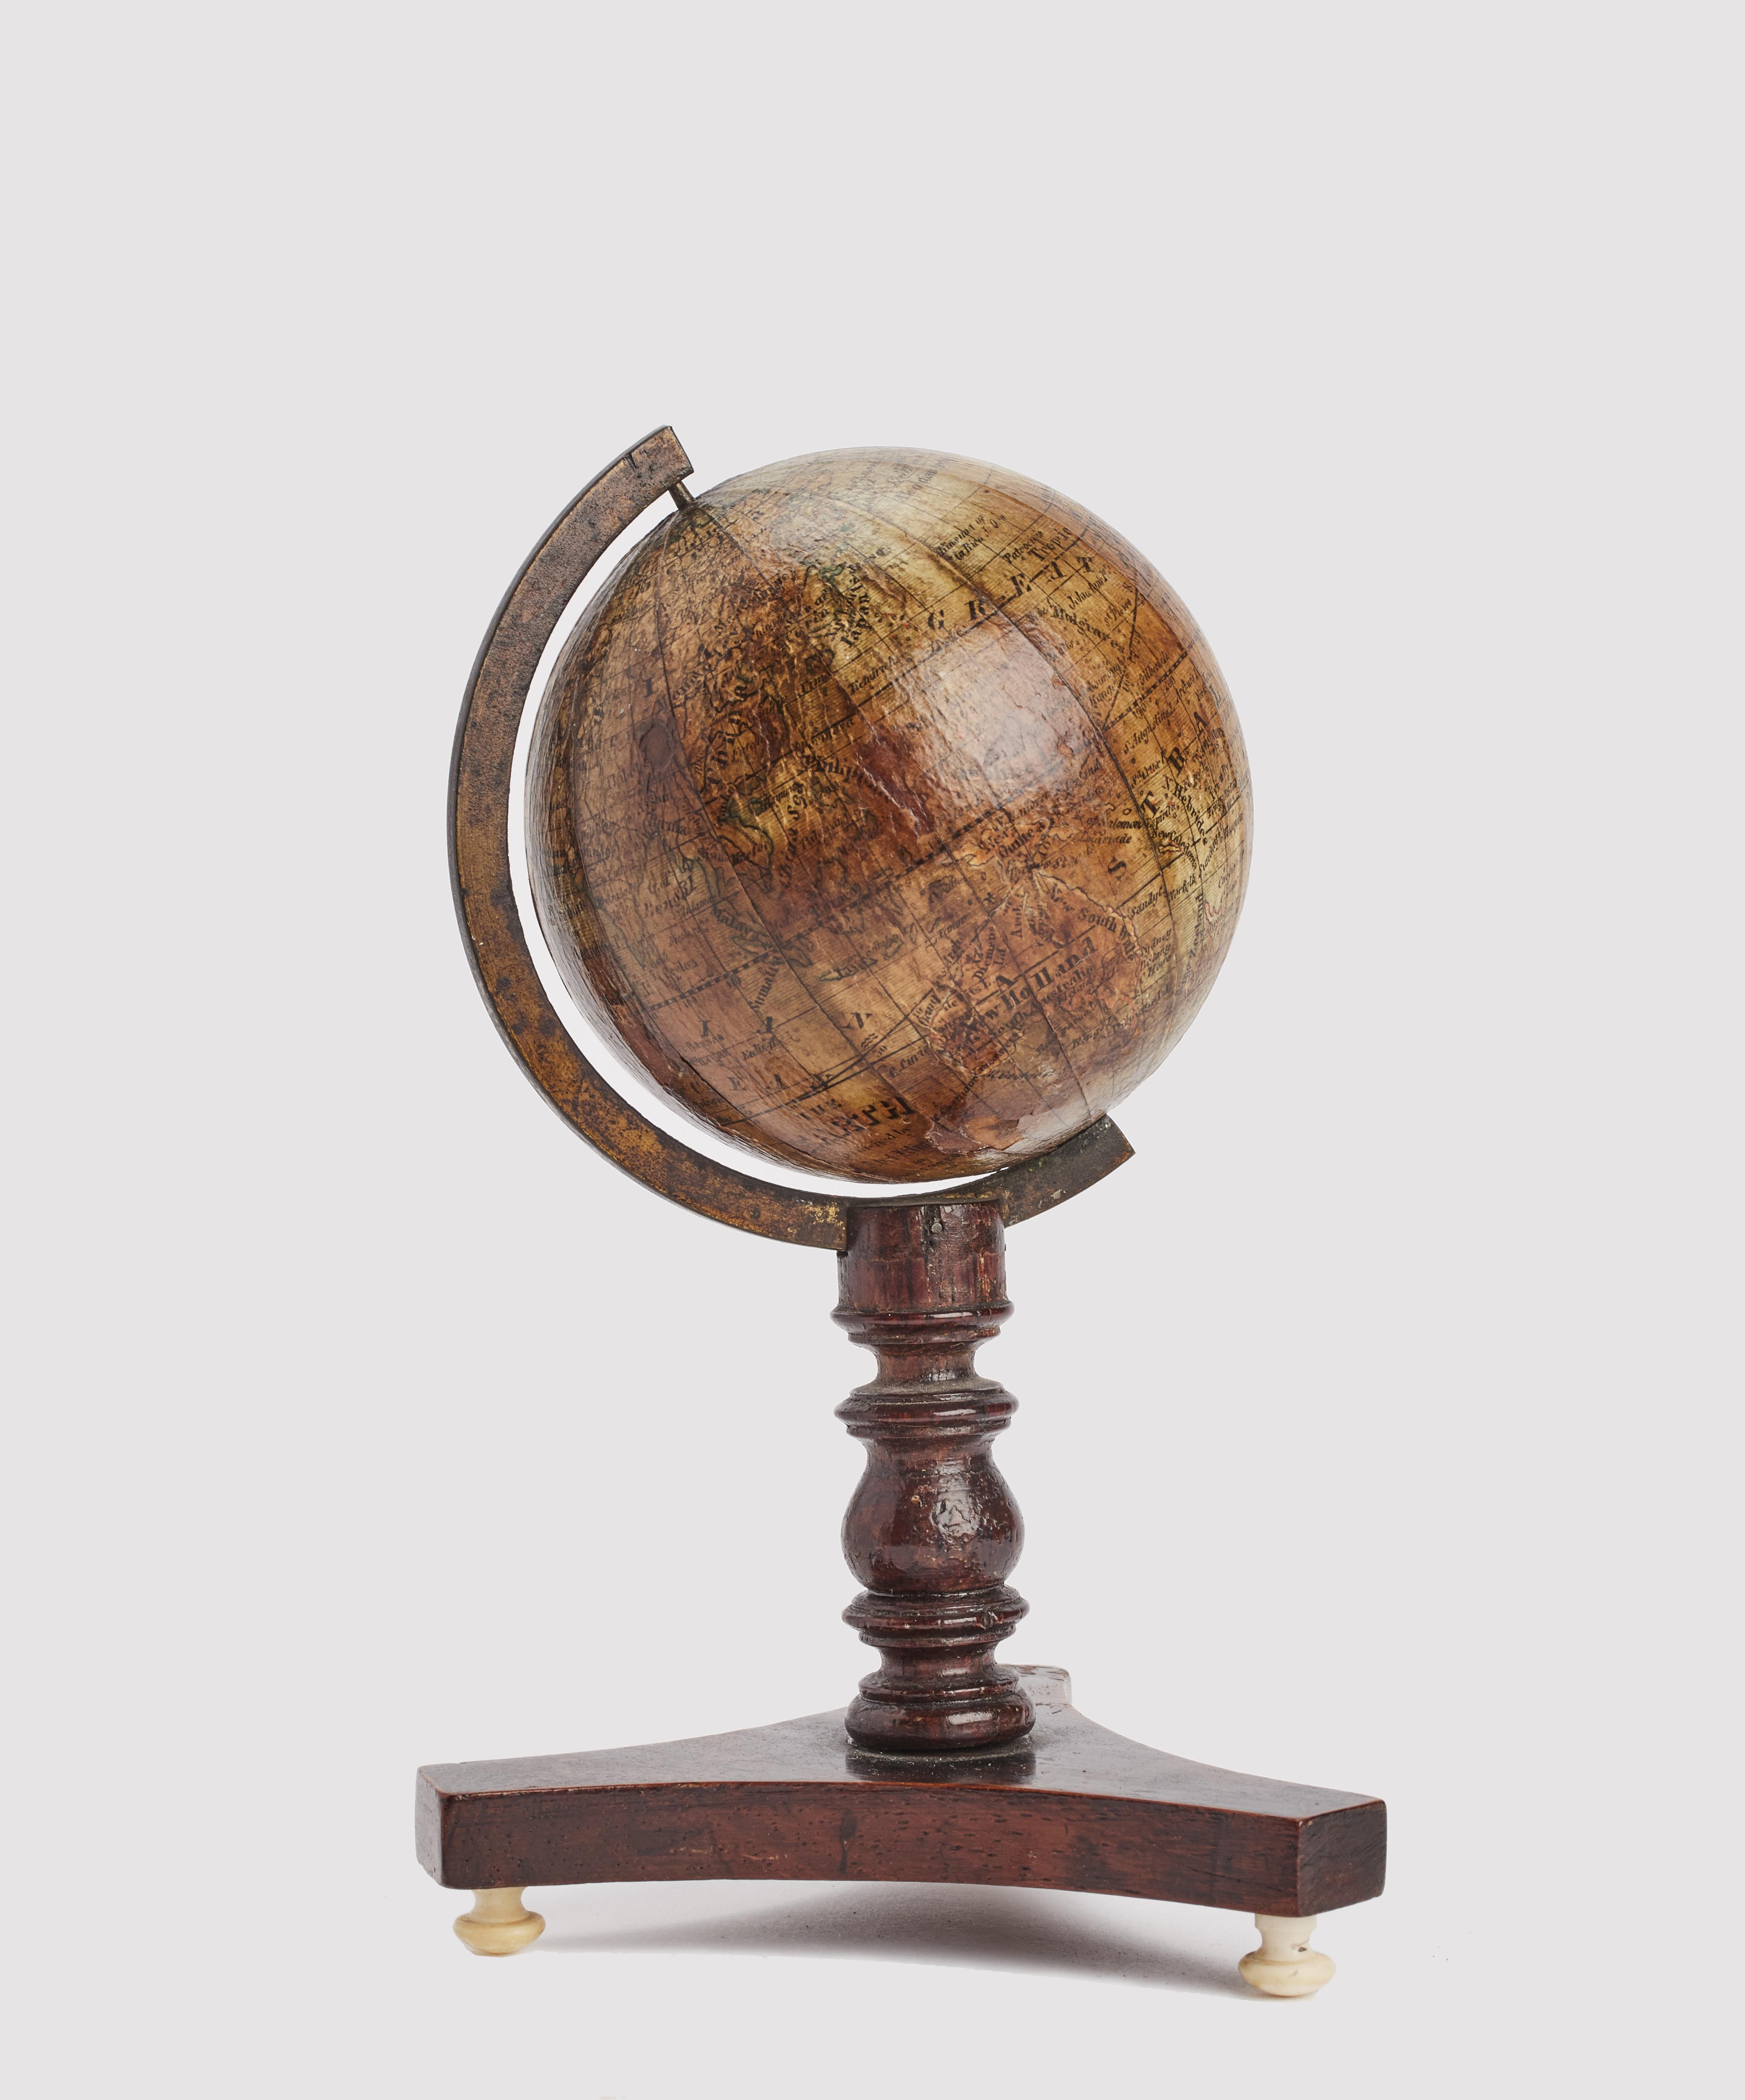 On a tripod base with ivory peduncles, a leg with a wavy profile rises. The brass half meridian is connected to it, which at its ends supports the axis of the small globe. The base is made of dark brown mahogany wood. The globe is made of